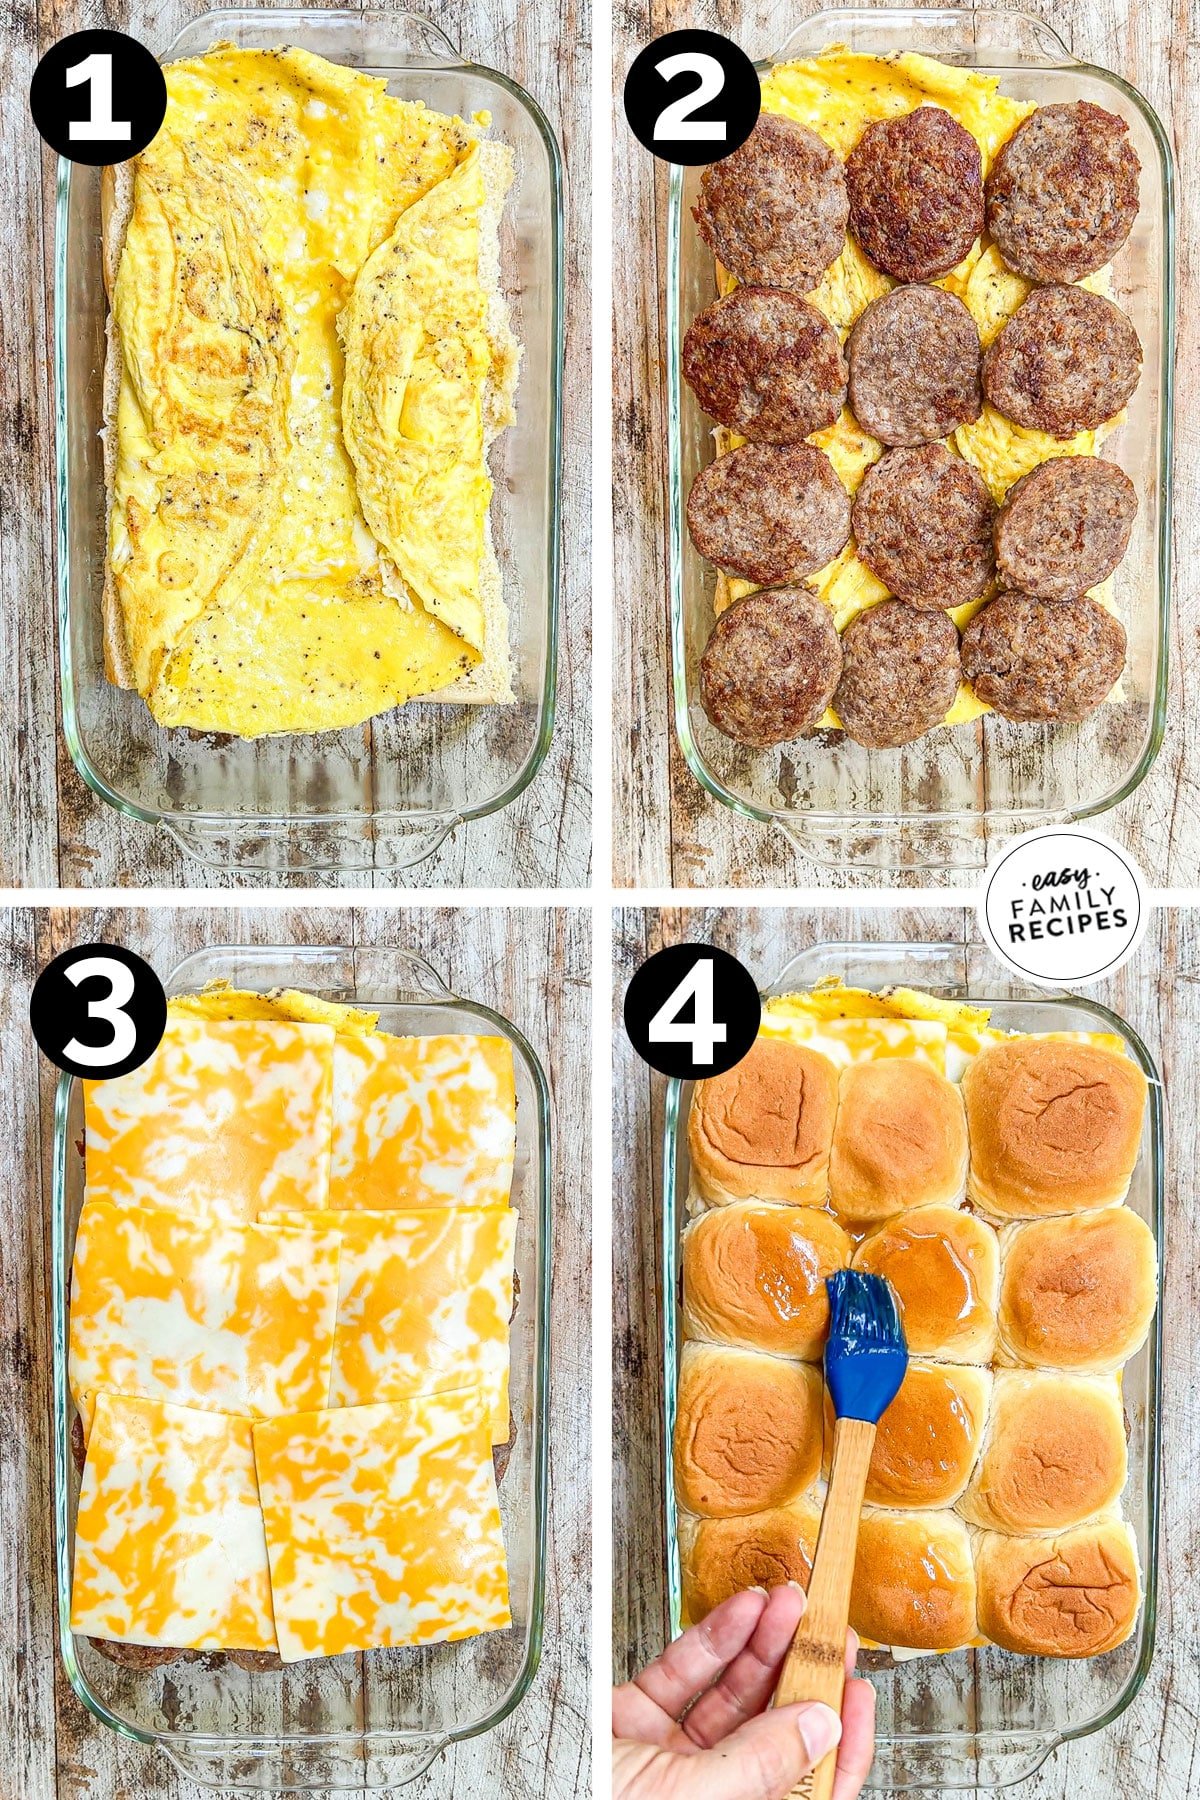 How to make Hawaiian roll breakfast sliders: 1) Layer the eggs over the bottoms of the rolls, 2) Add the sausage, 3) Add the cheese, 4) Add the tops of the rolls and brush with maple butter